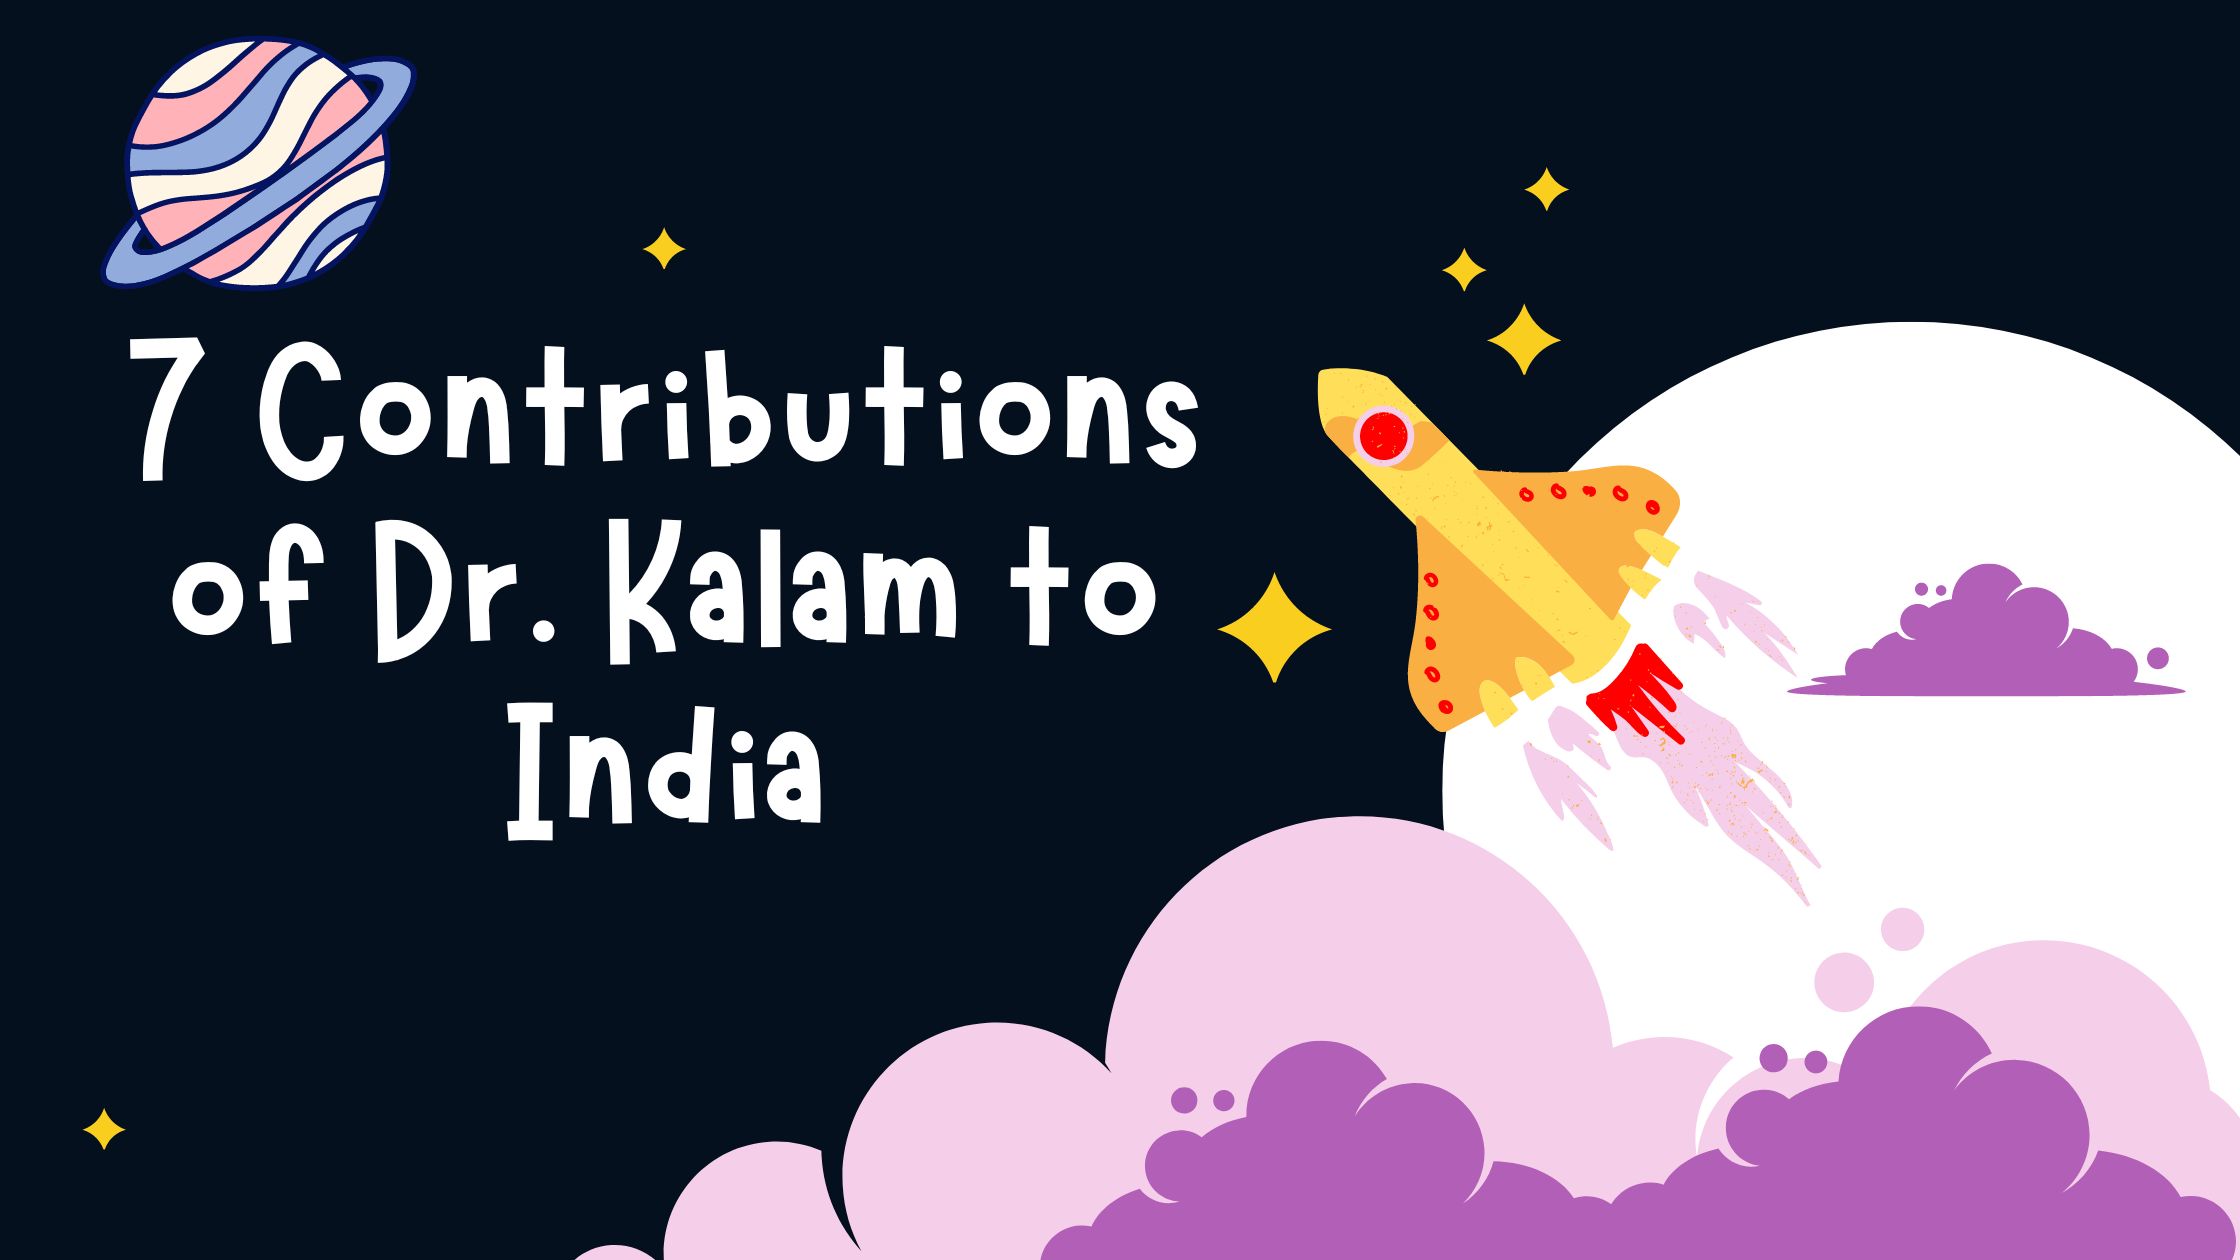 7 Contributions of Dr. Kalam to India